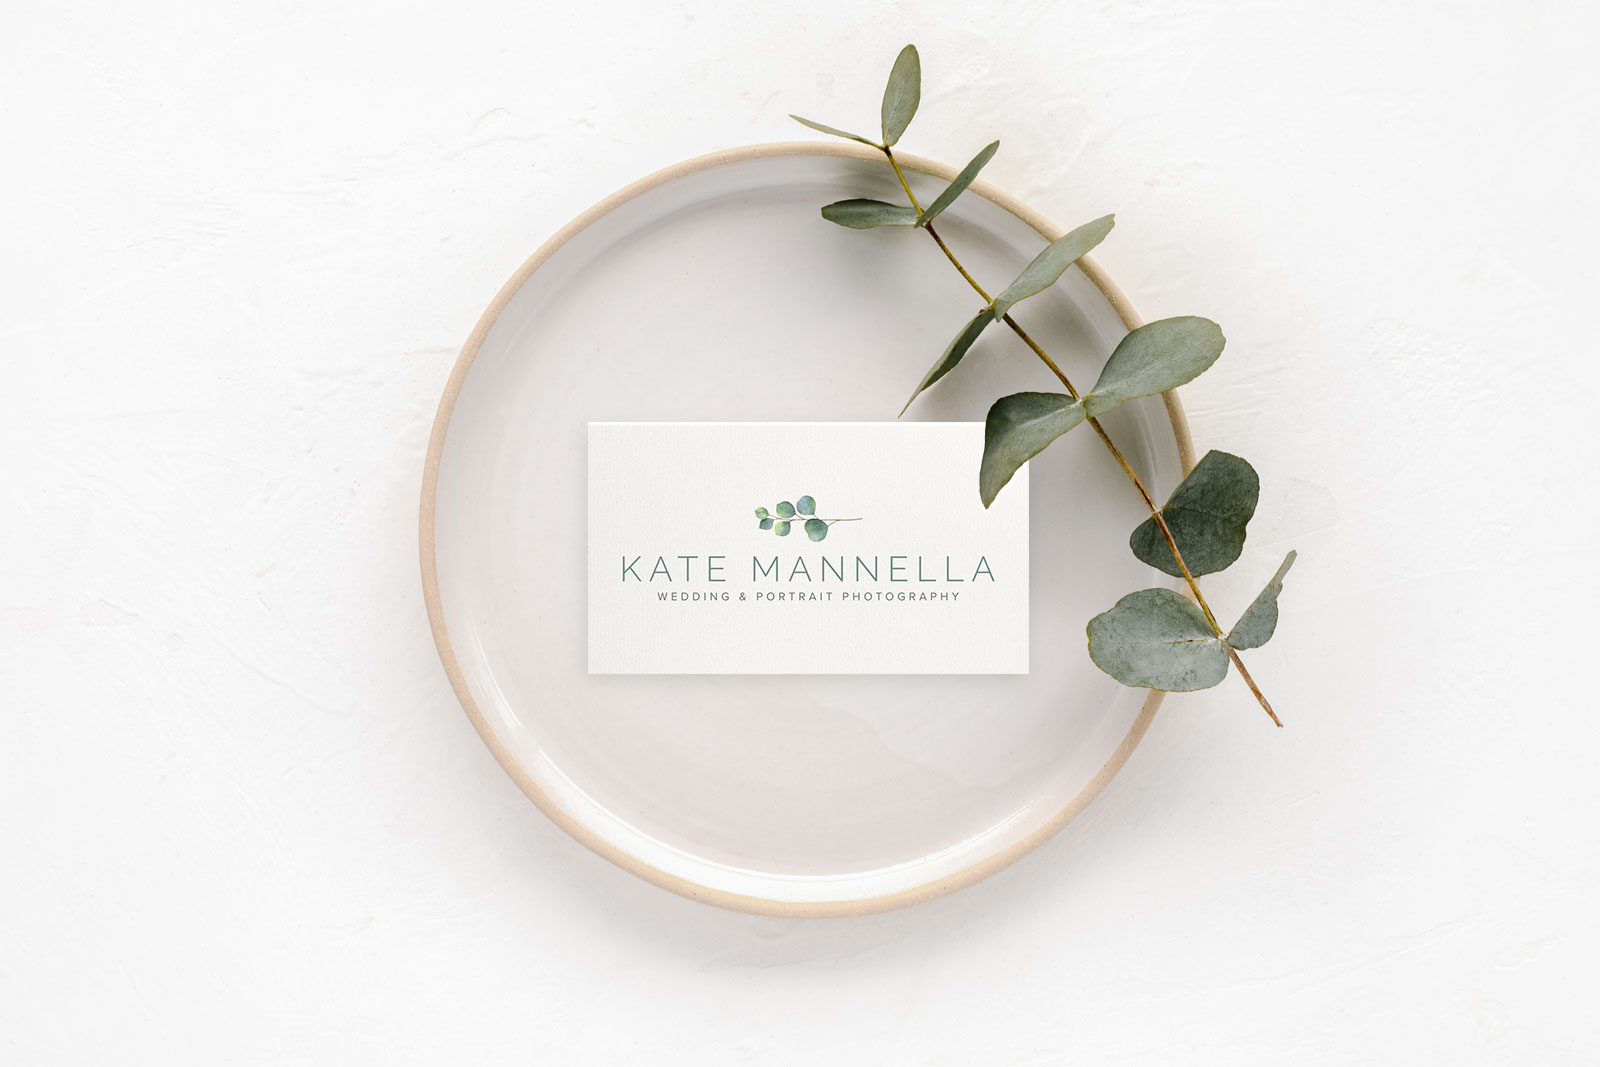 Photo of a plate with an elegantly designed business card laying on top, with a piece of eucalyptus off to the side